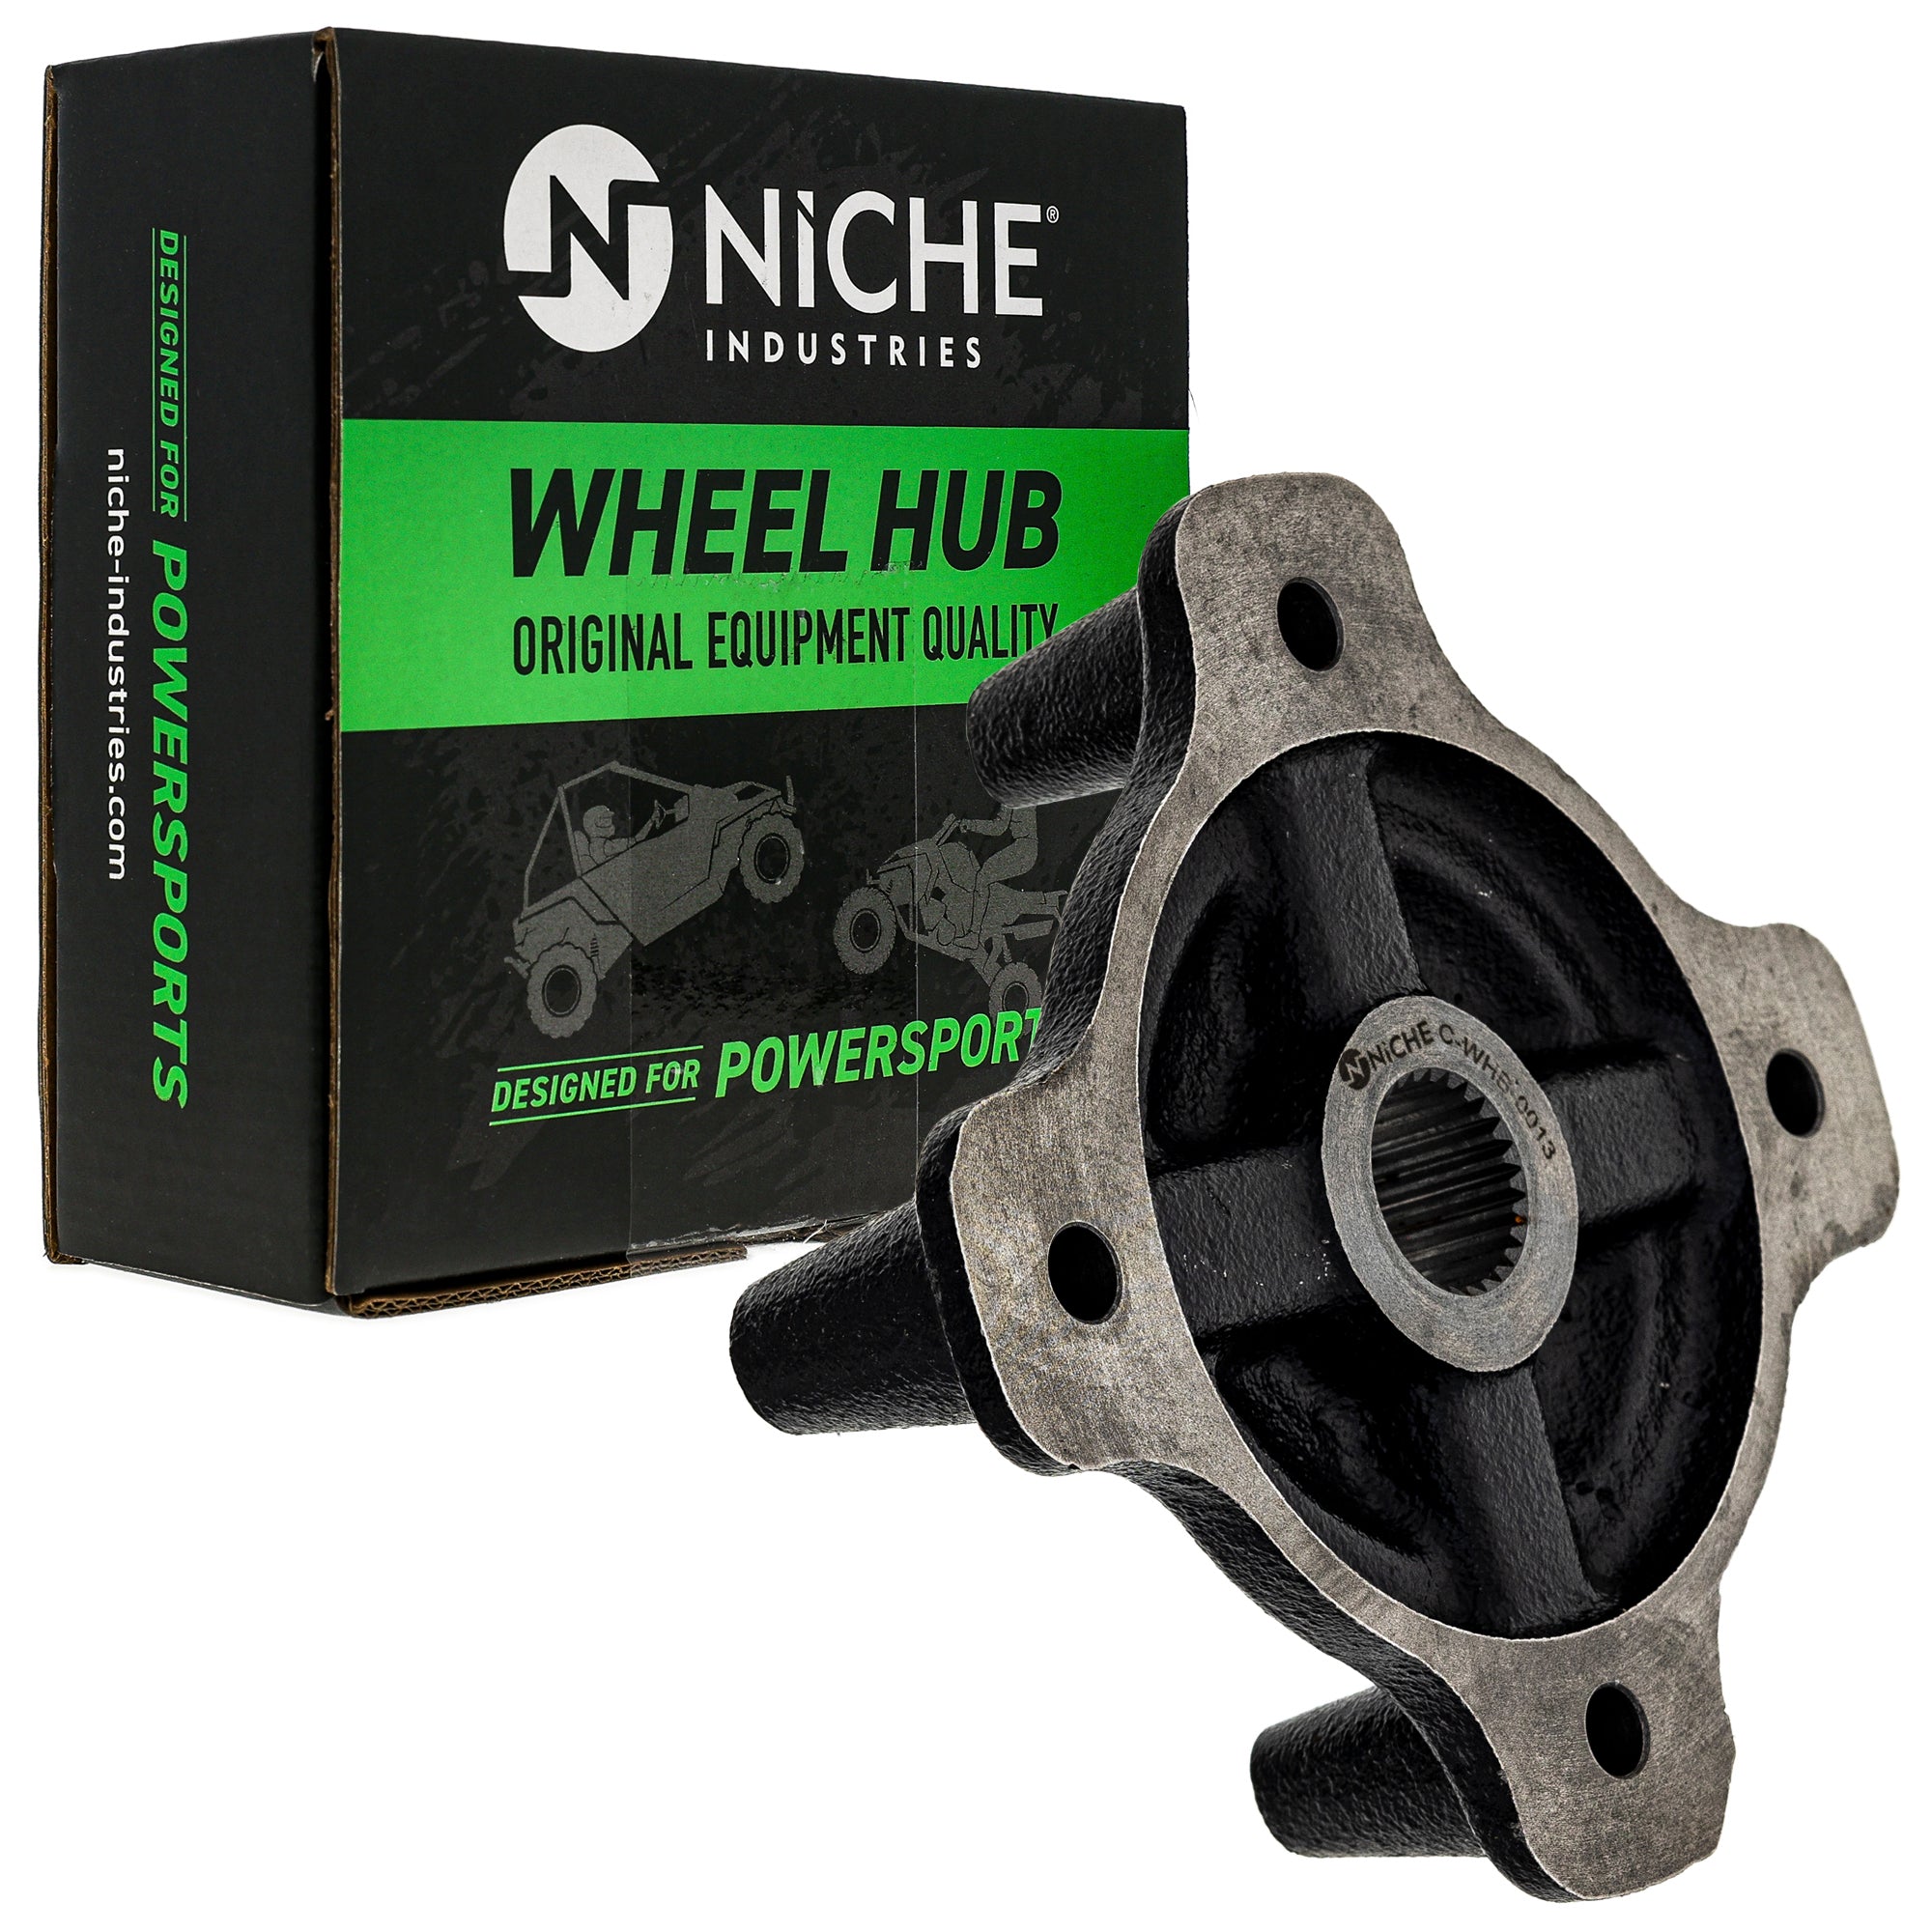 NICHE 519-CWH-2235B Wheel Hub Set 2-Pack for zOTHER BRP Can-Am Ski-Doo